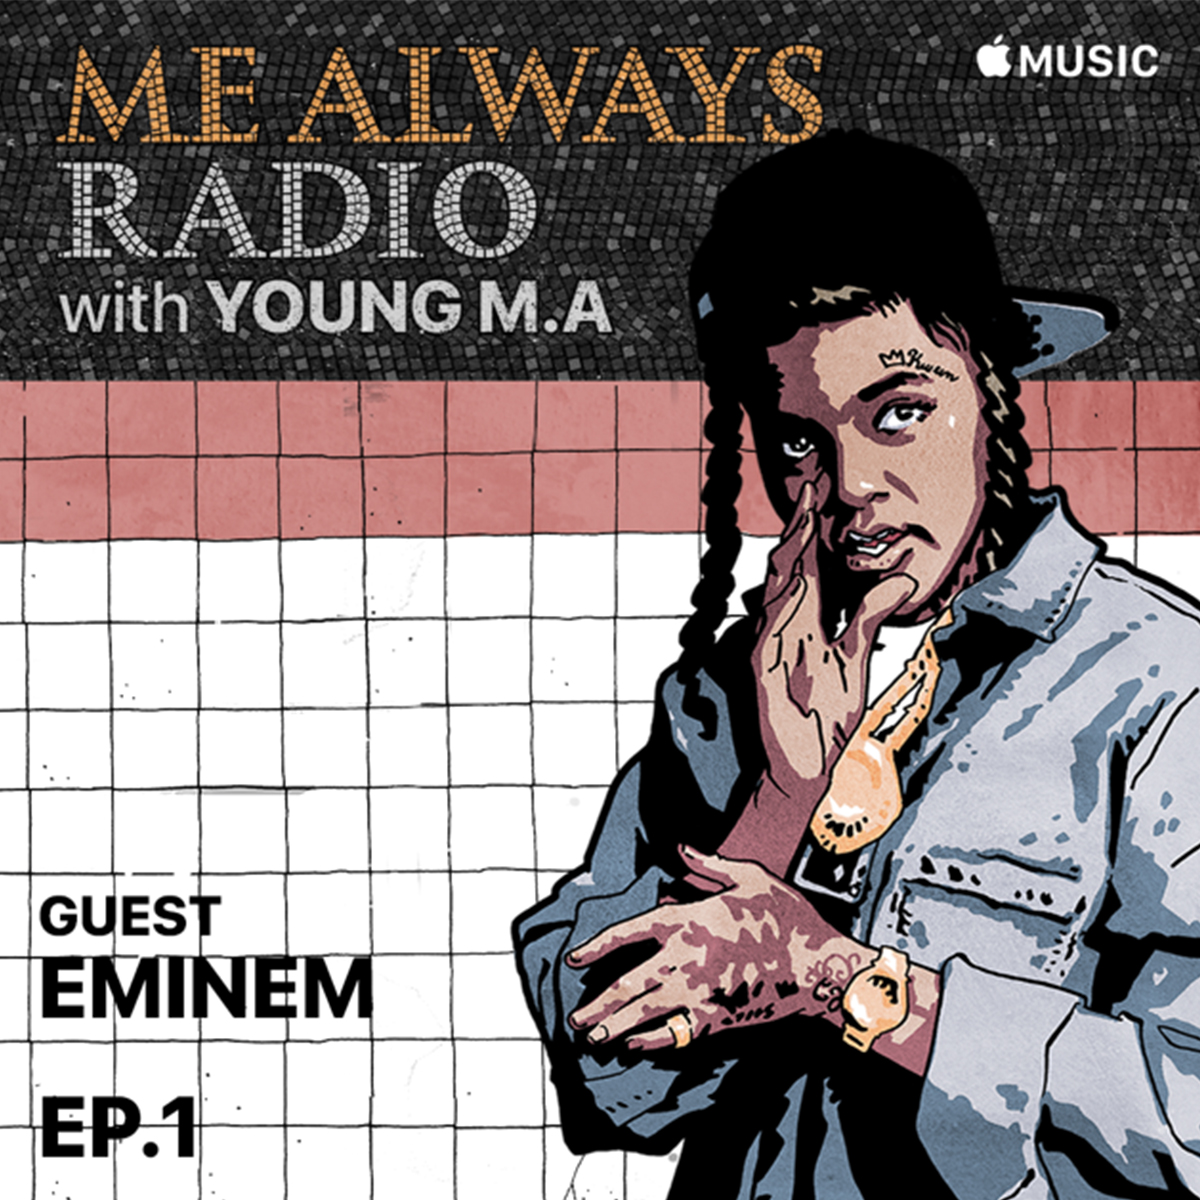 Honored to be @YoungMAMusic’s first guest on her new radio show- check it out! @applemusic  